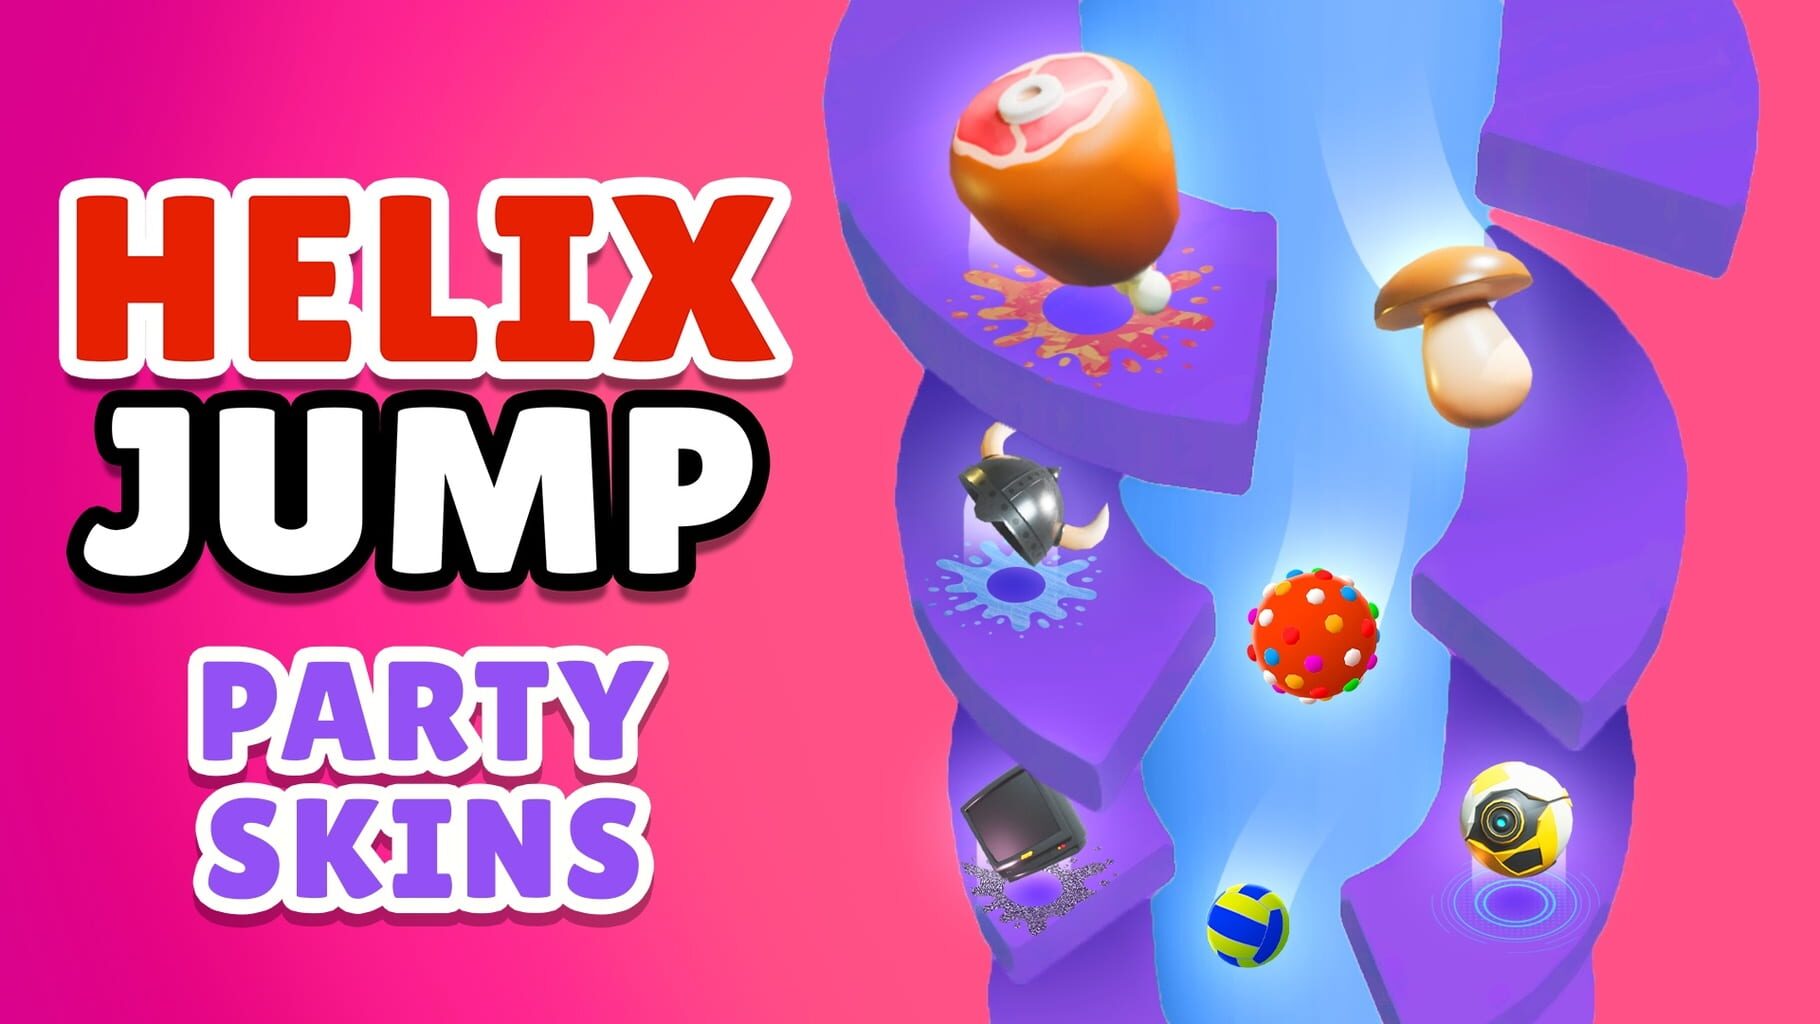 Helix Jump: Party Skins Image